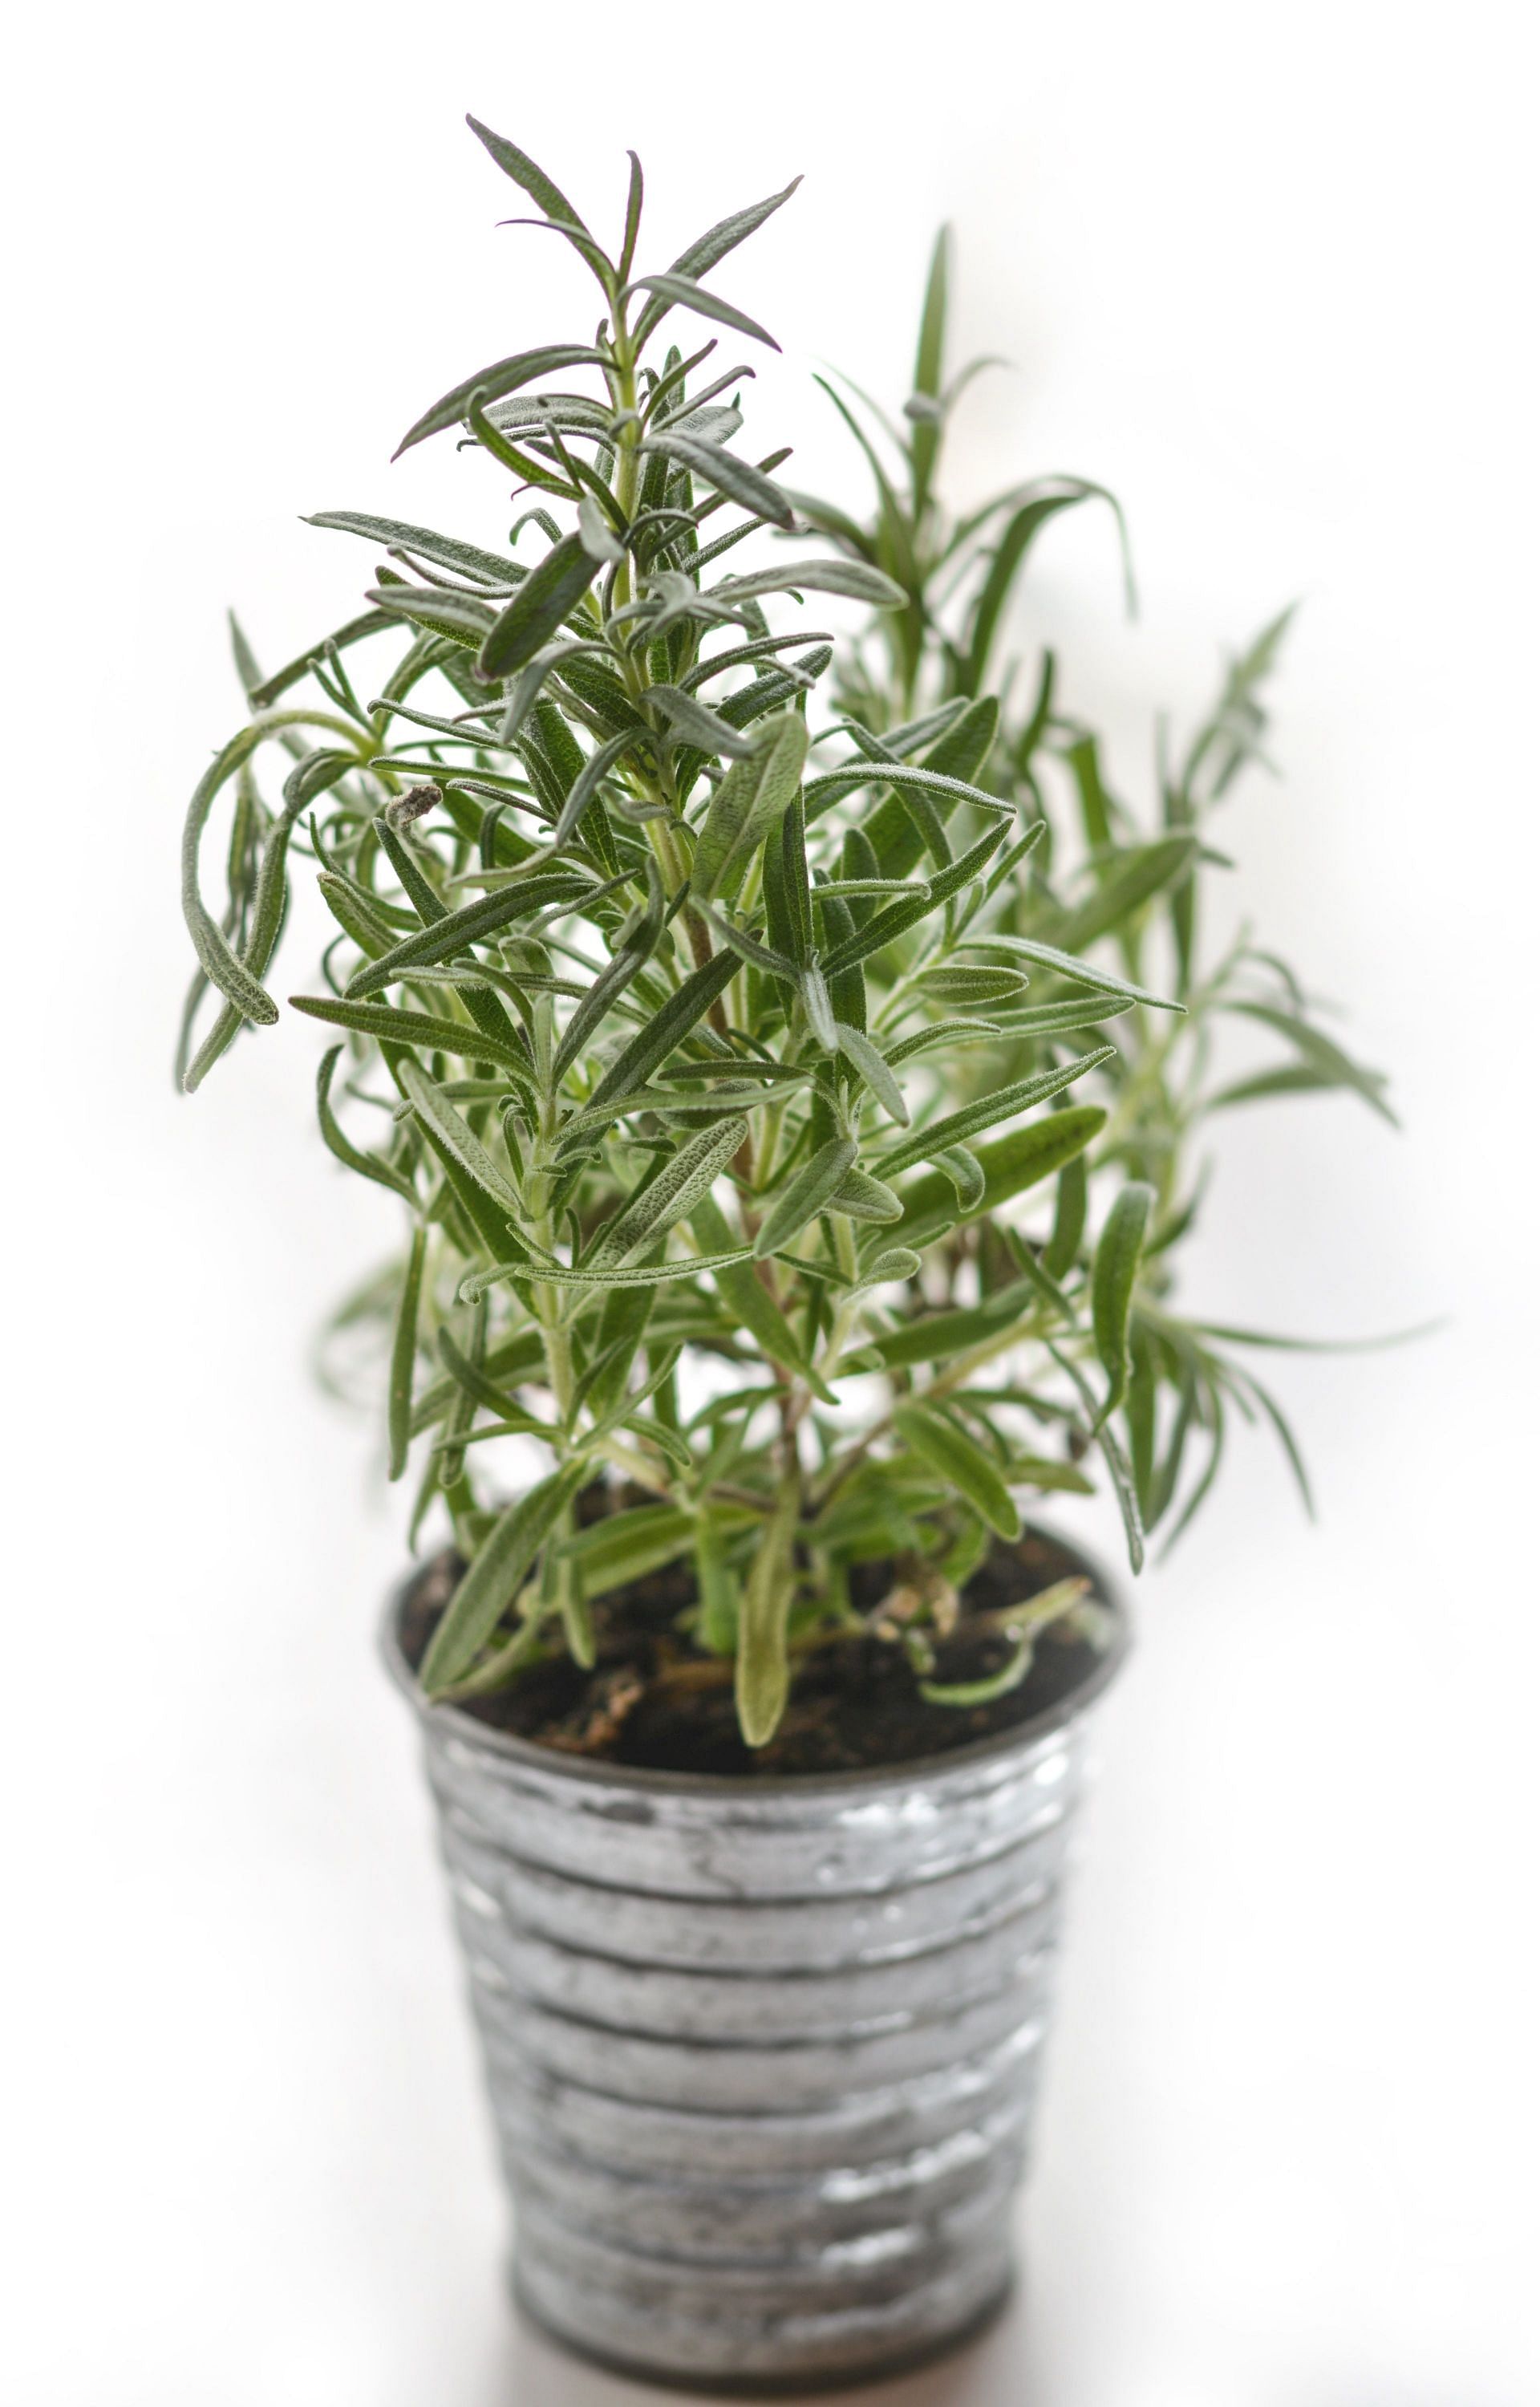 Rosemary stimulates blood circulation, promoting healthy hair growth and scalp (Image via Pexels)